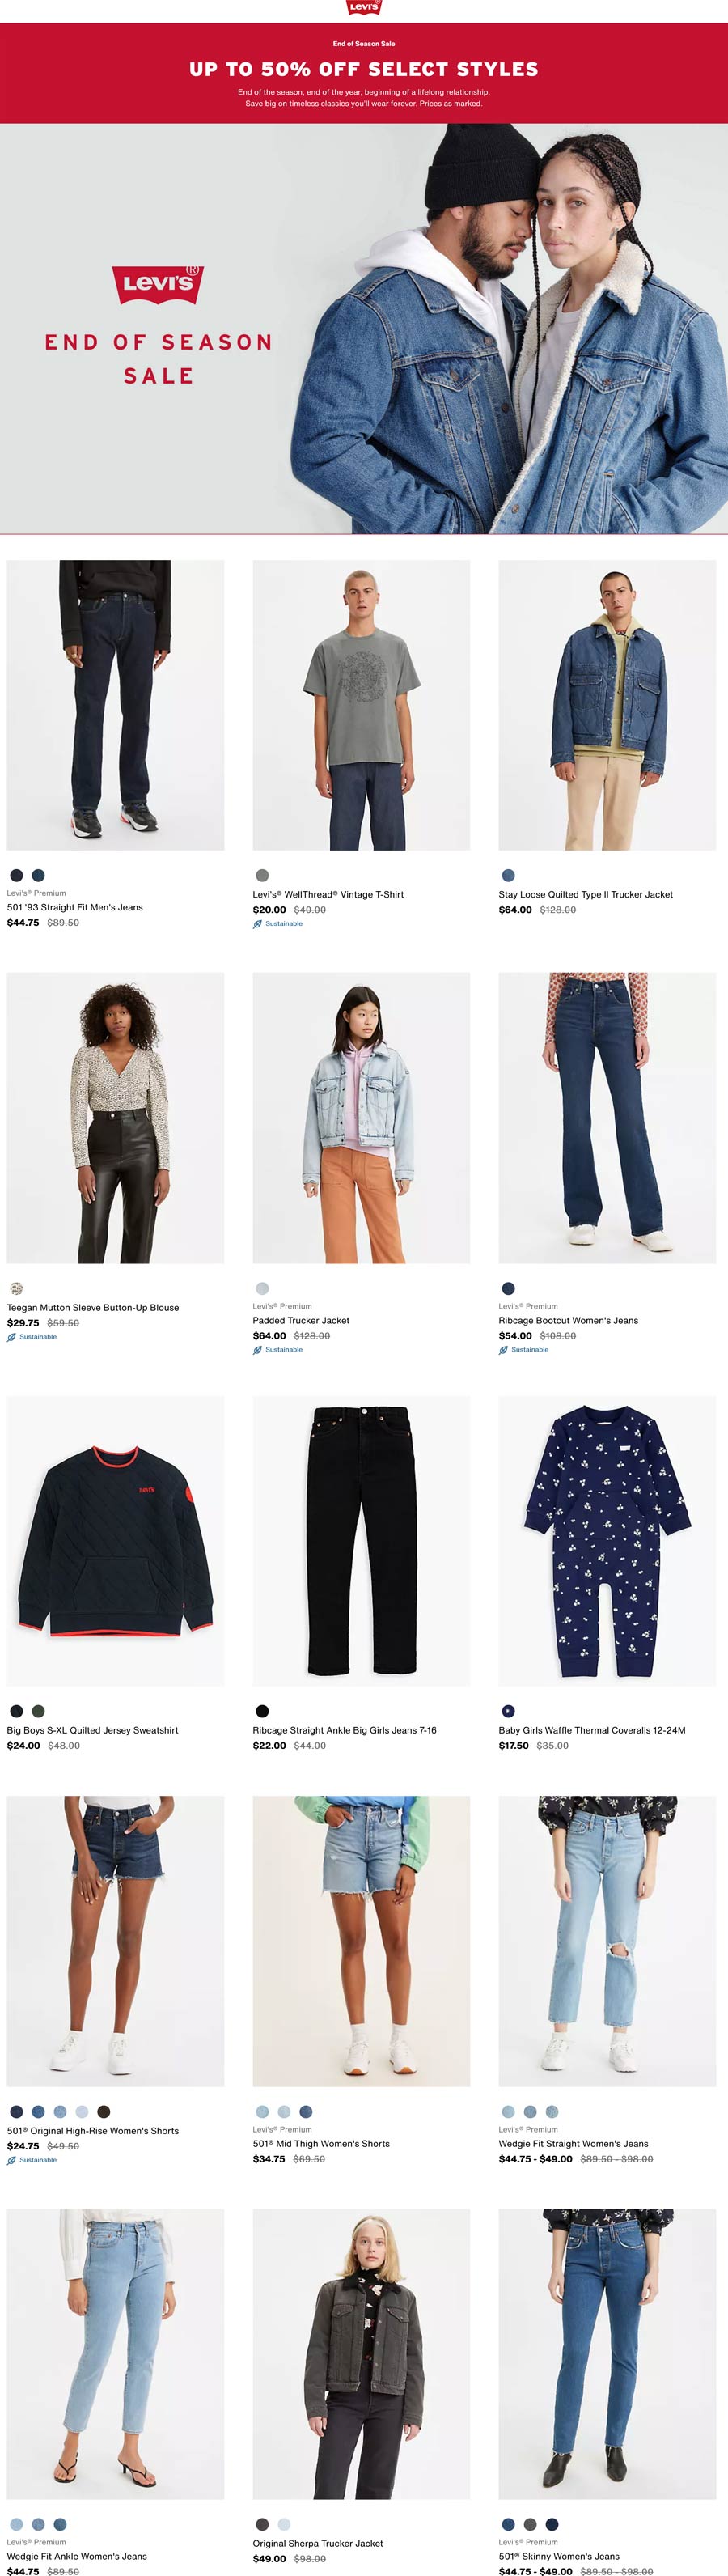 Levis stores Coupon  50% off seasonal clearance online at Levis #levis 